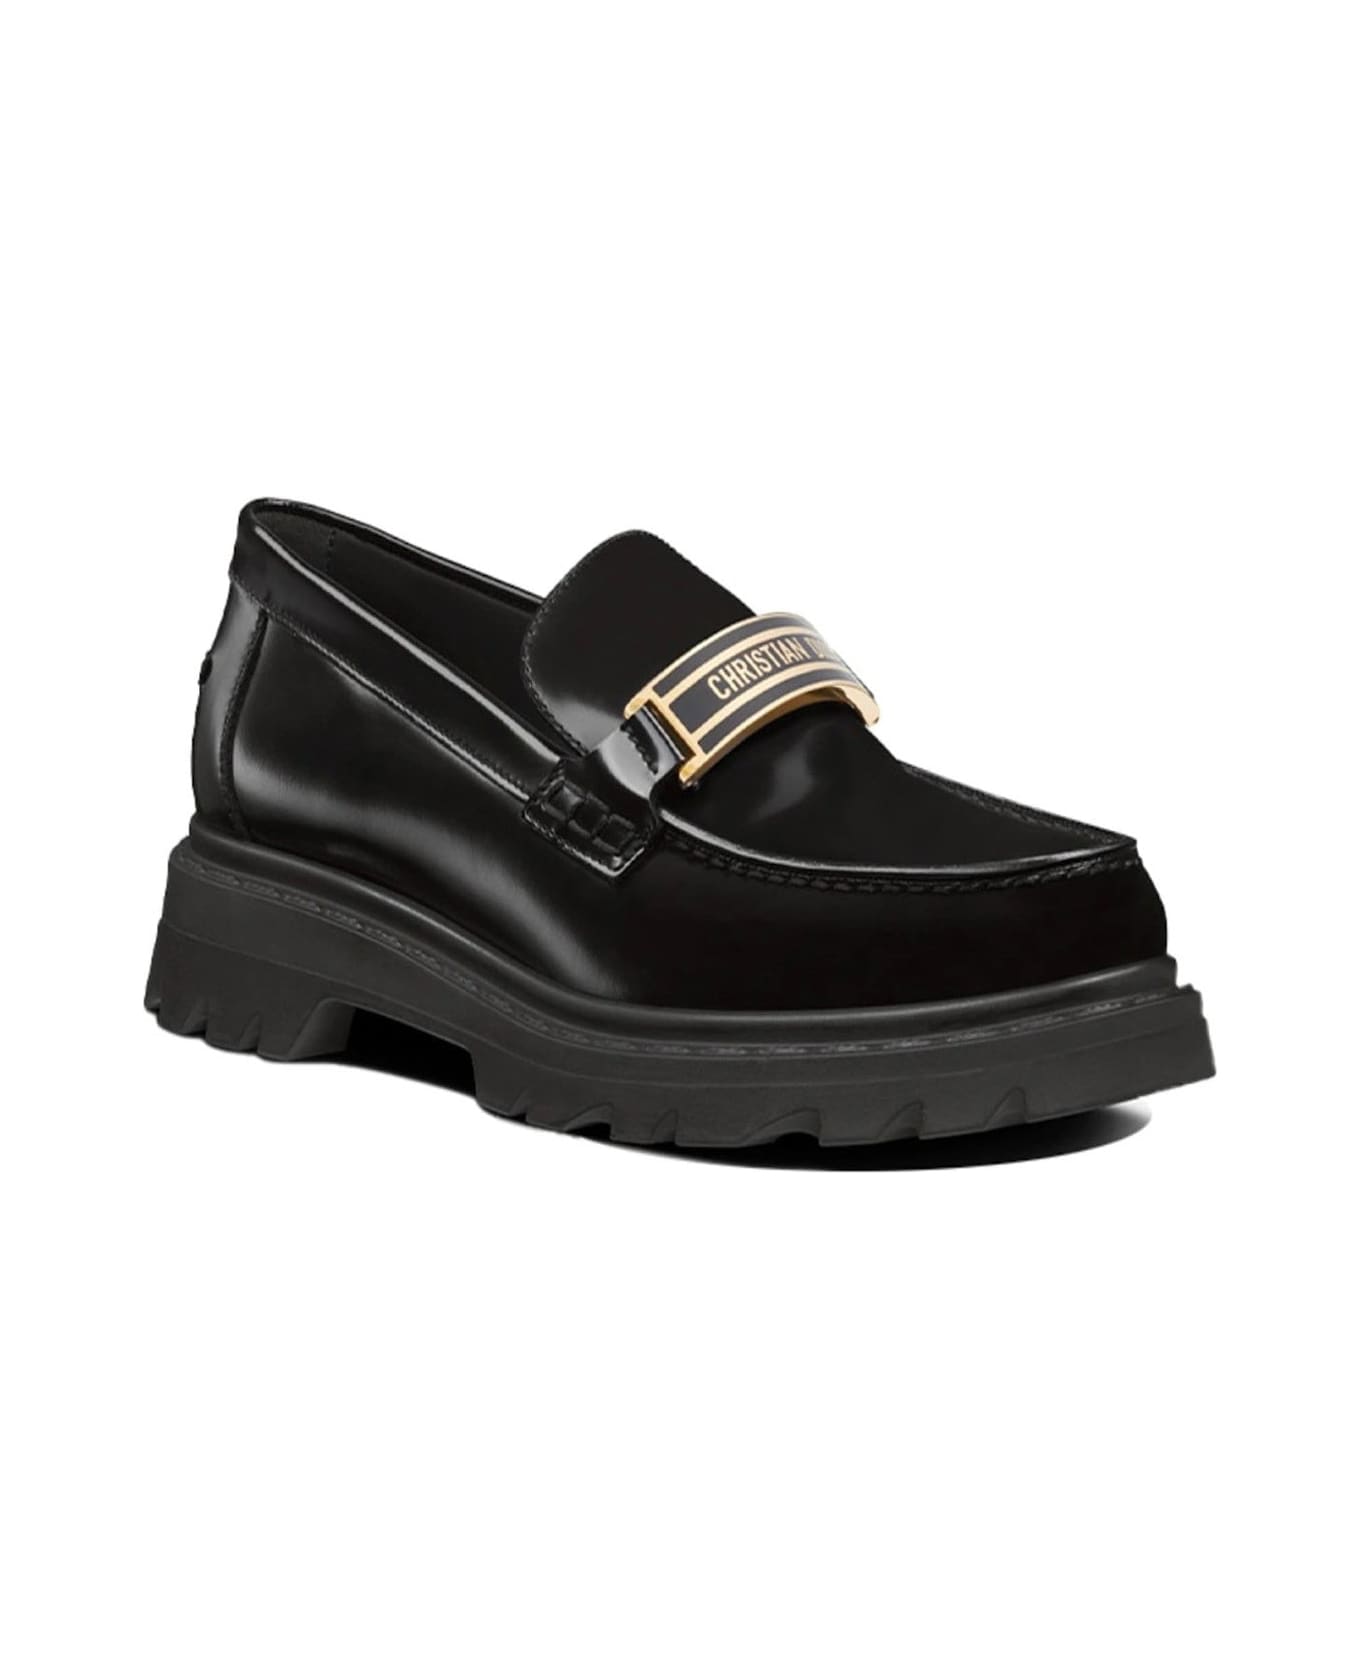 Dior Leather Loafers - Black